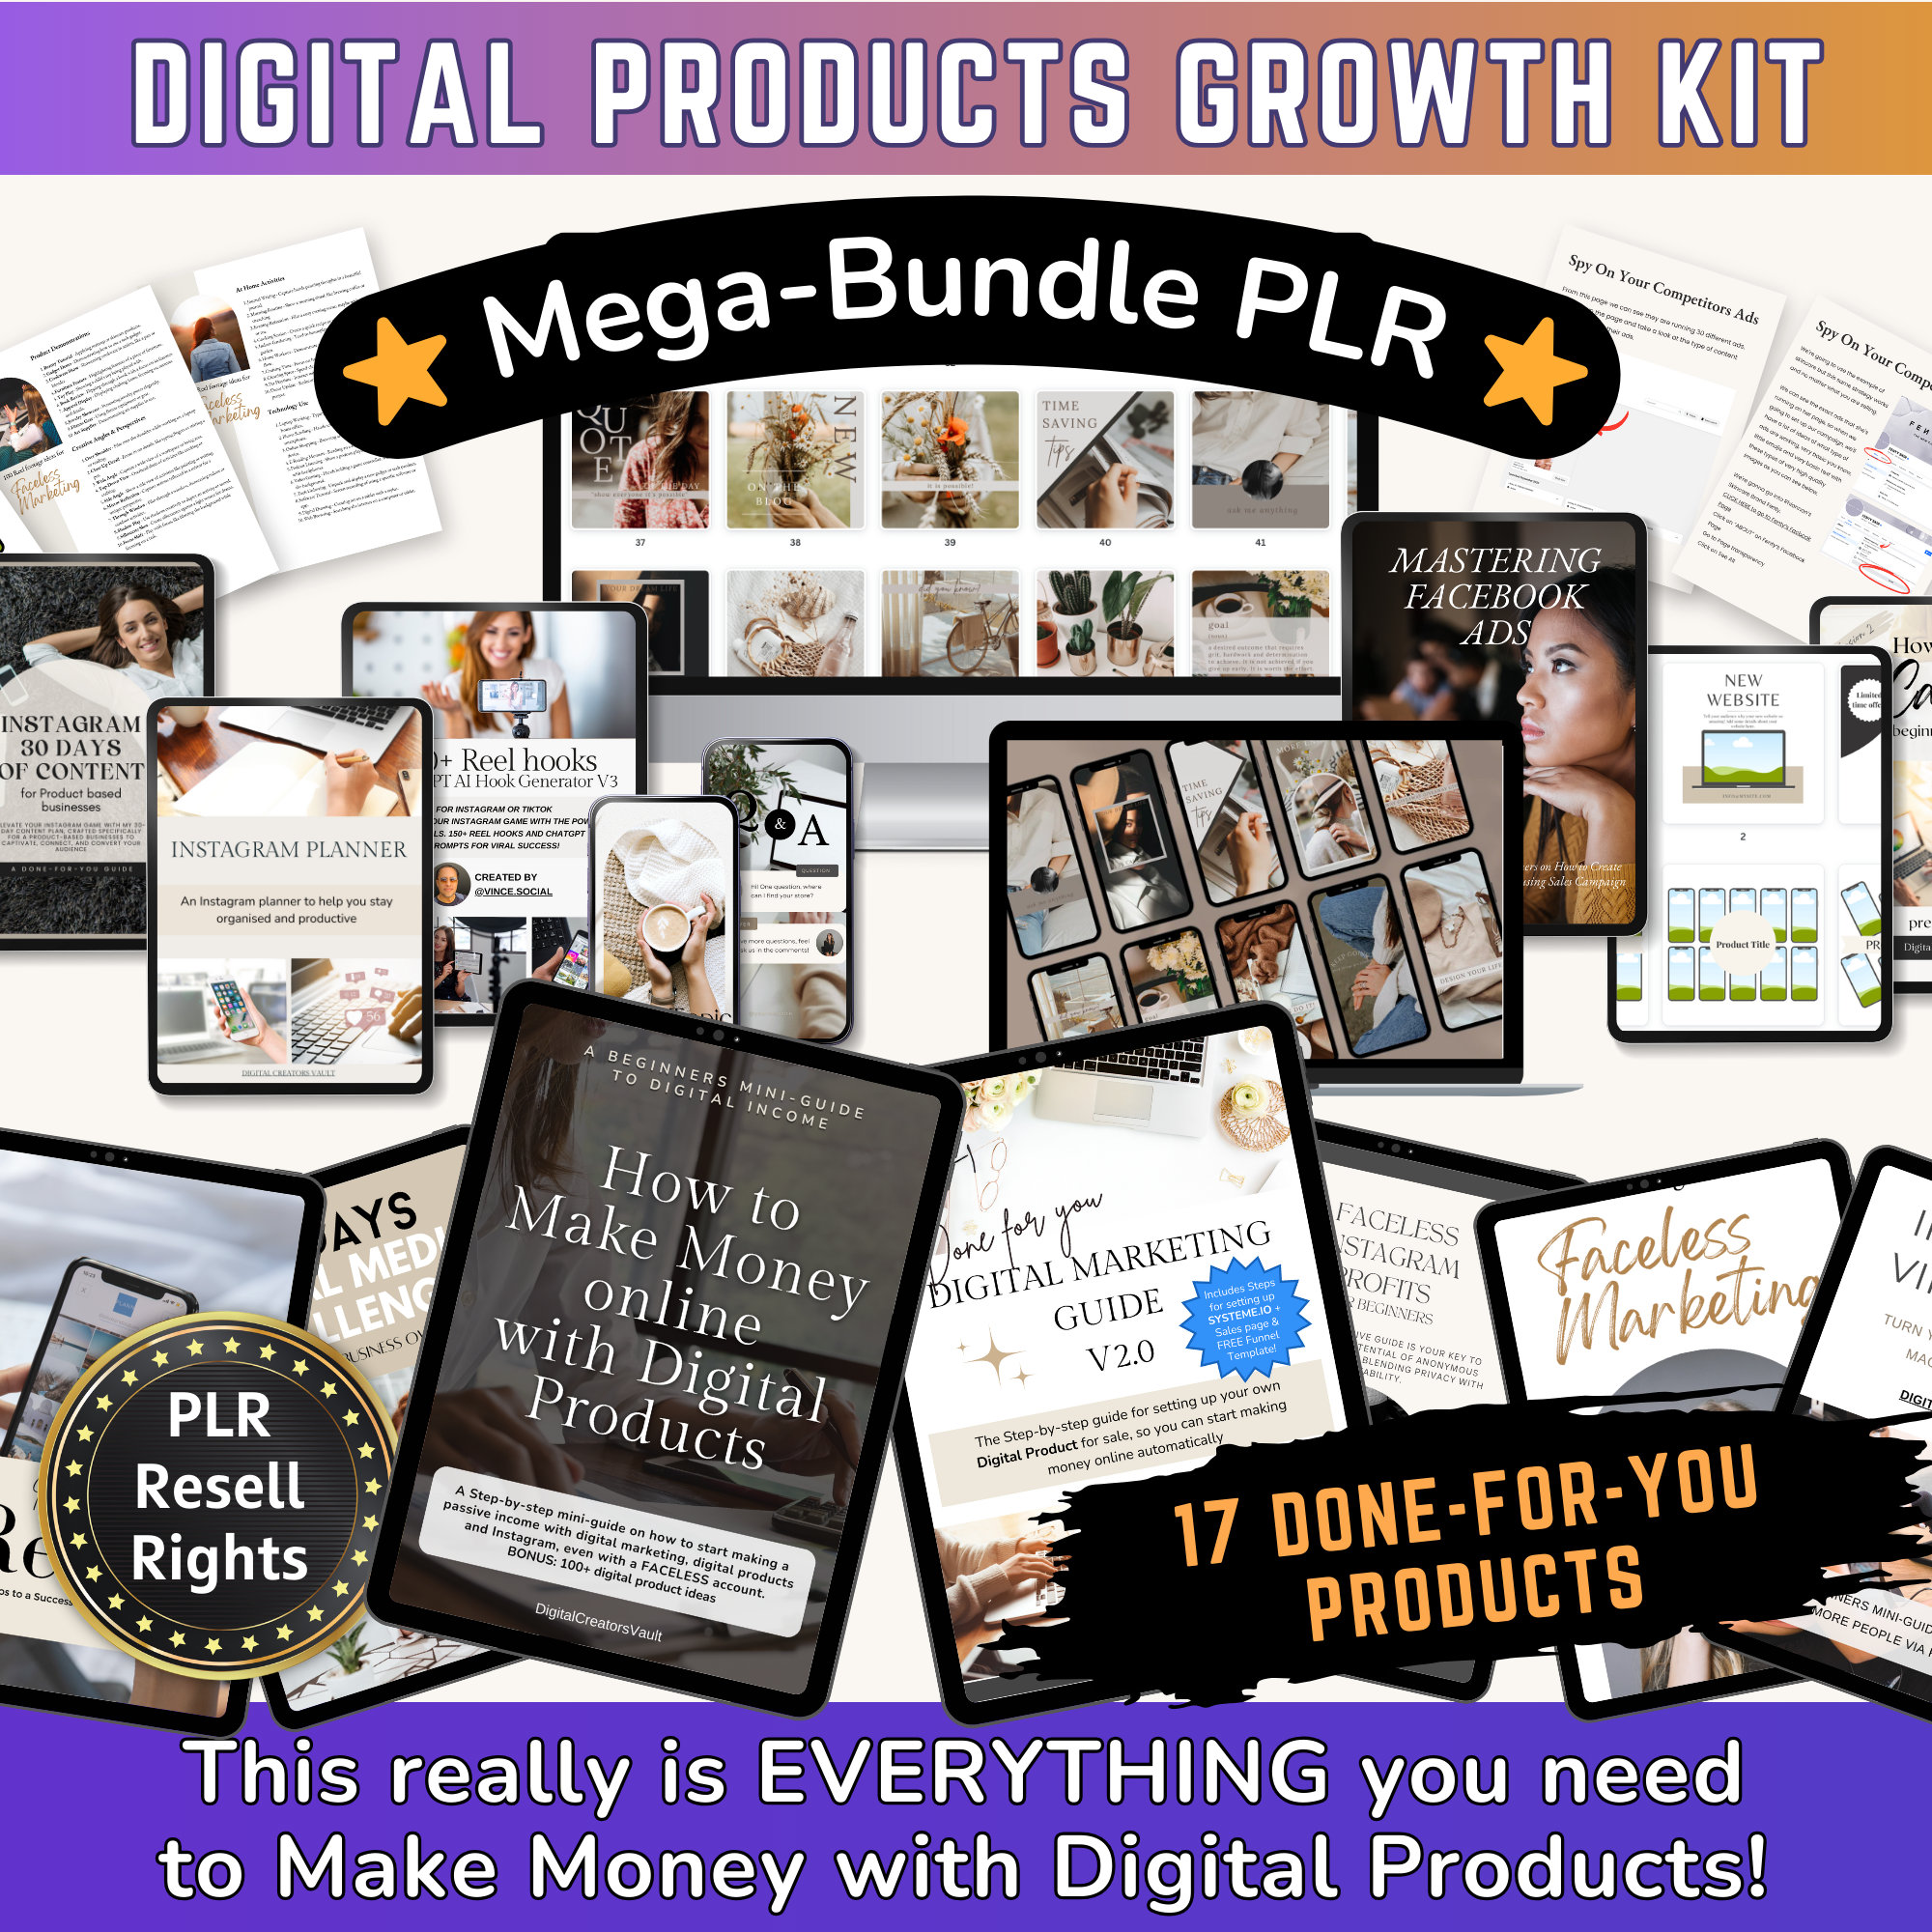 Digital Products Growth KIT mega-bundle - Digital marketing - Instagram -  PLR Ebook guides - Work from home PLR resell rights passive income - Digital  Creators Vault Digital Products with MRR Master